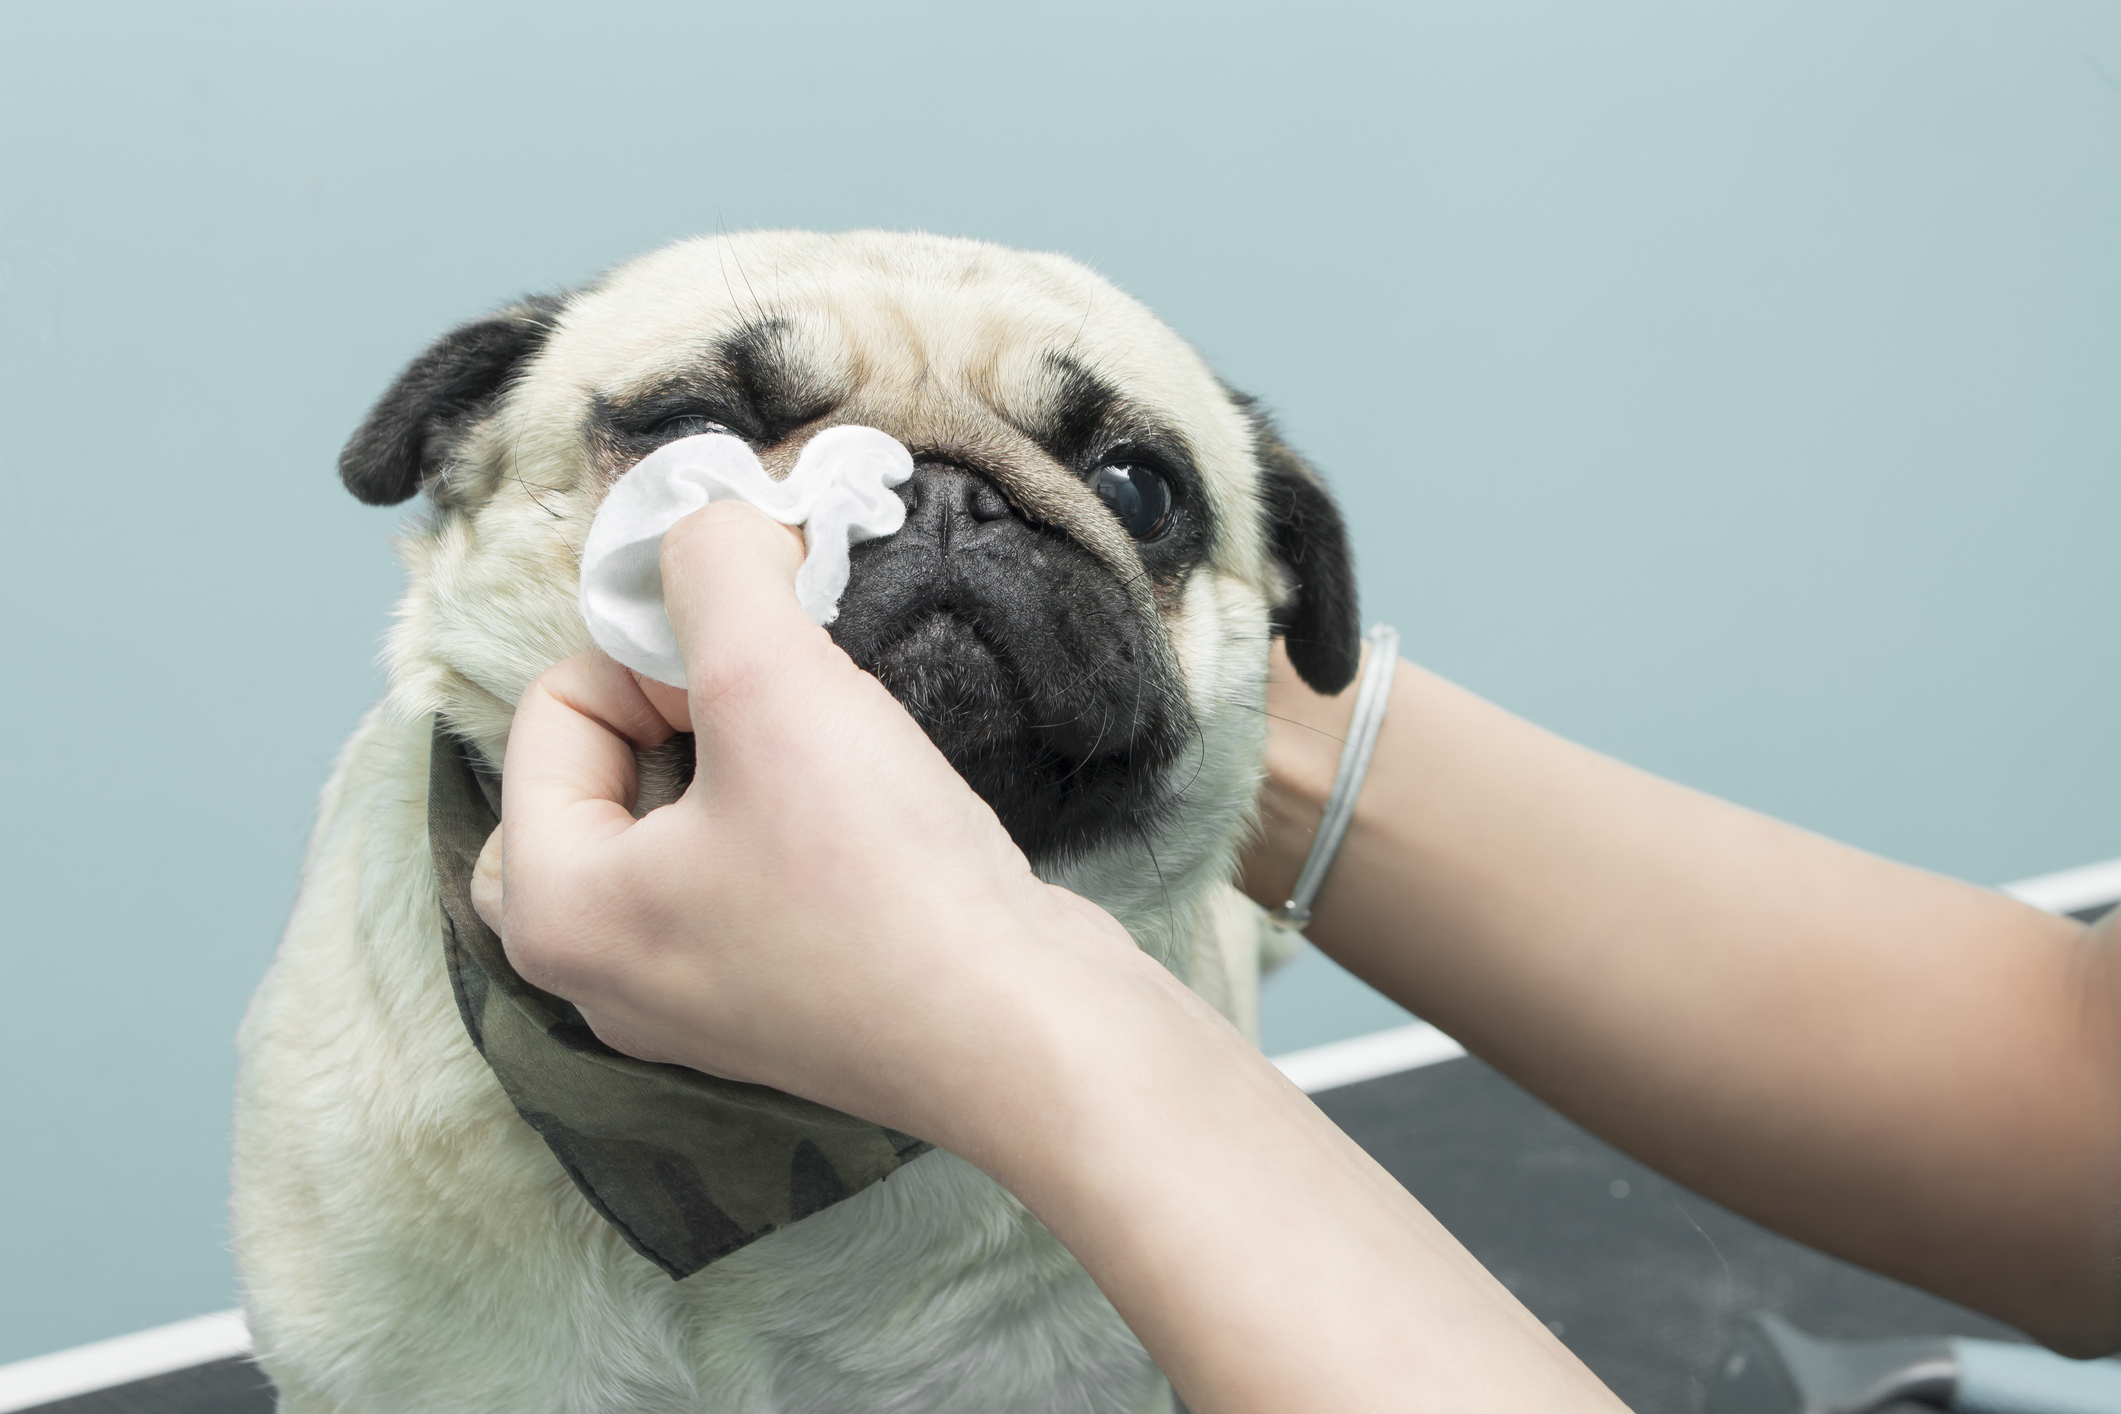  Pet parent wiping mucus from a Pug’s nose